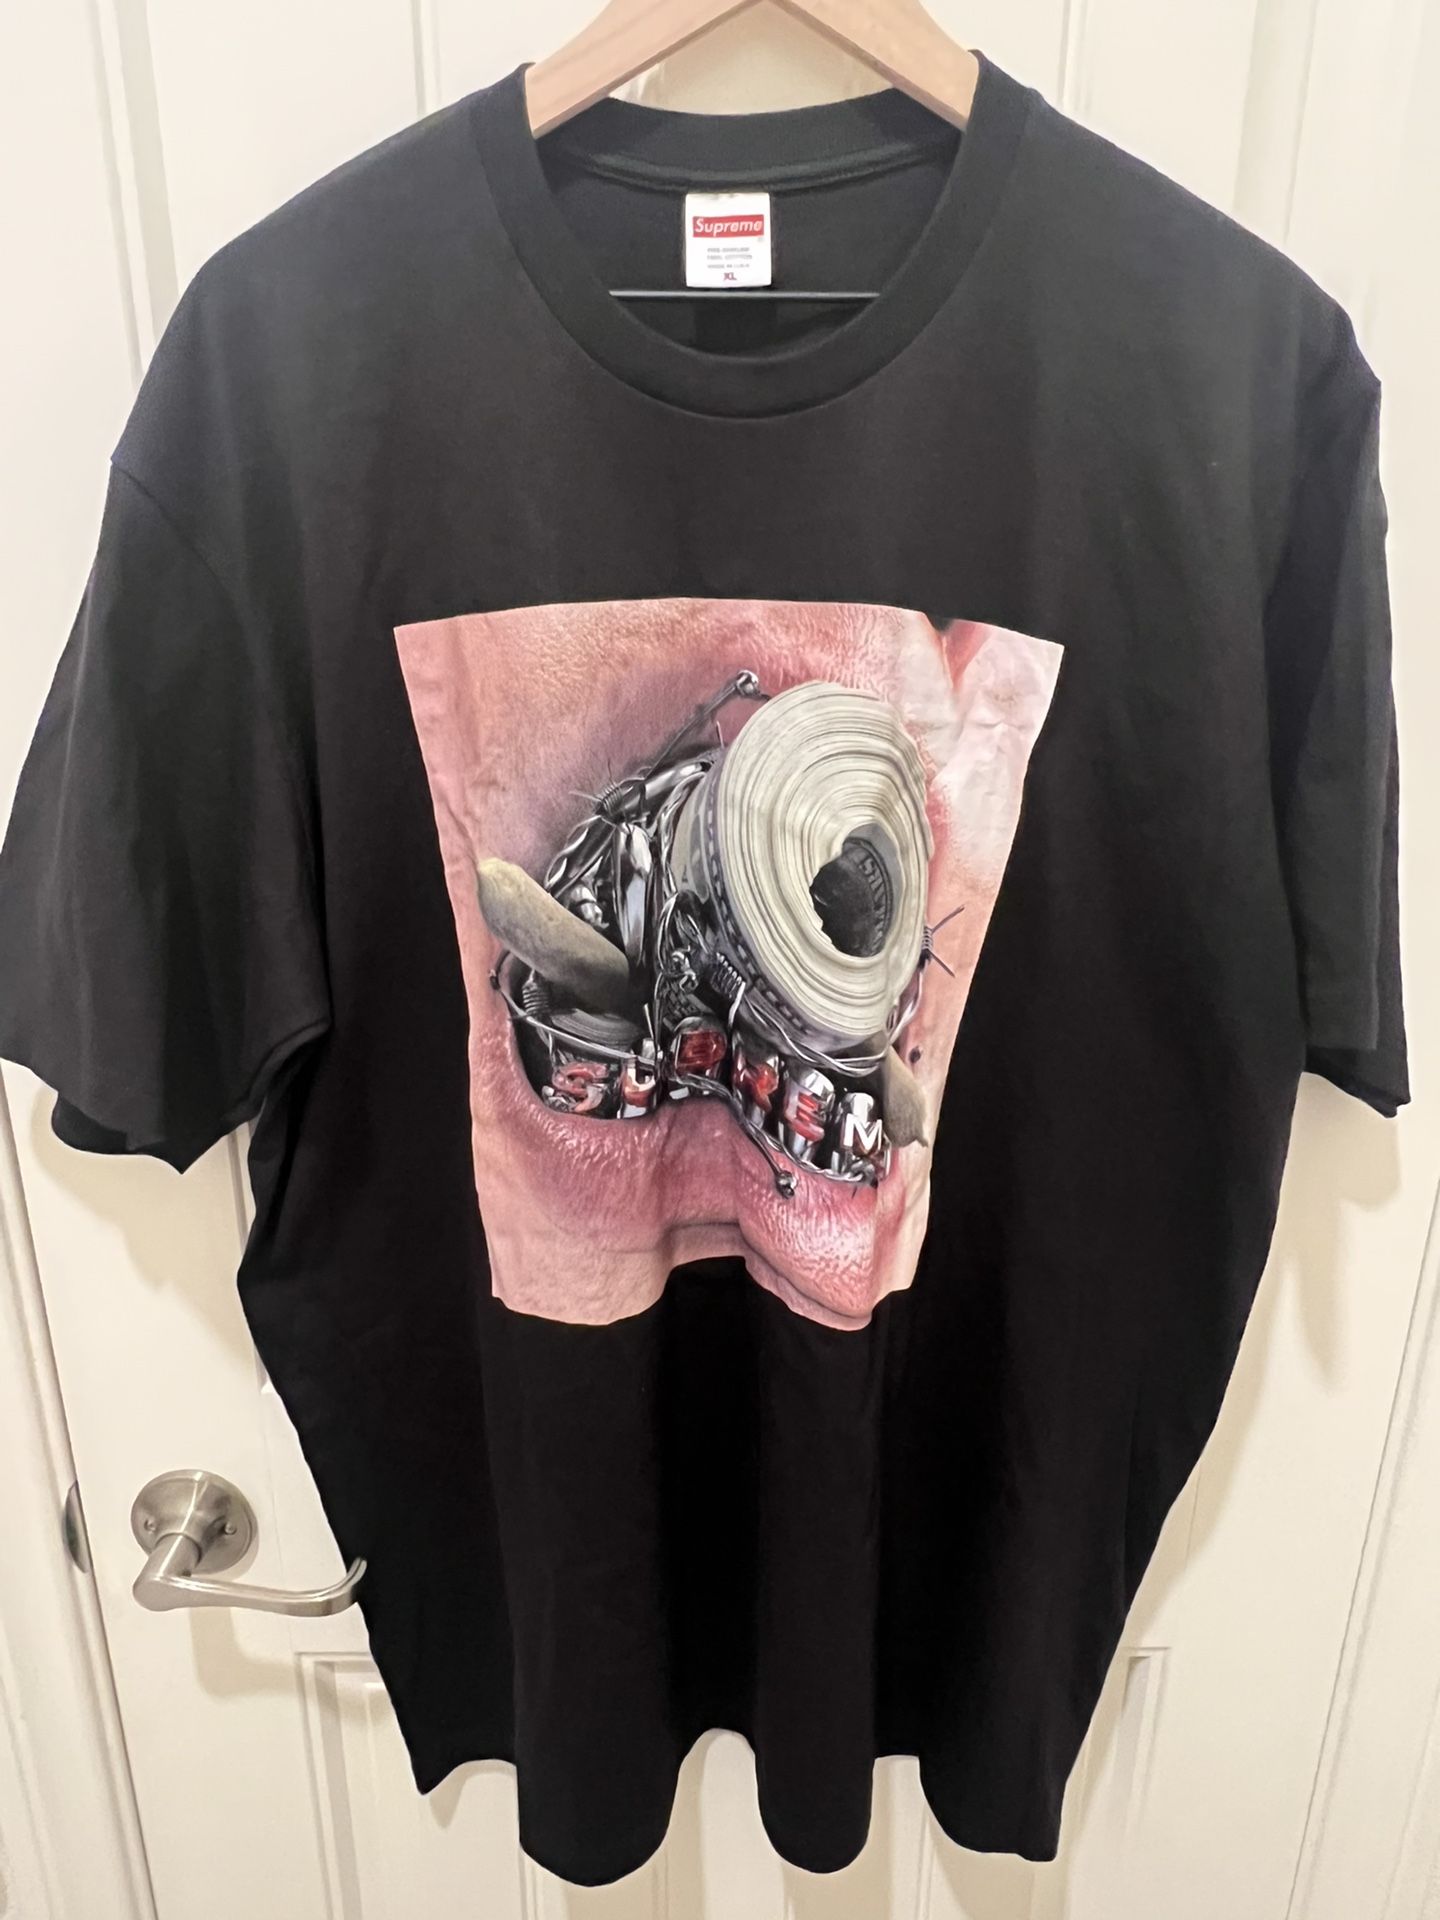 Supreme Braces Tee for Sale in Chino, CA - OfferUp